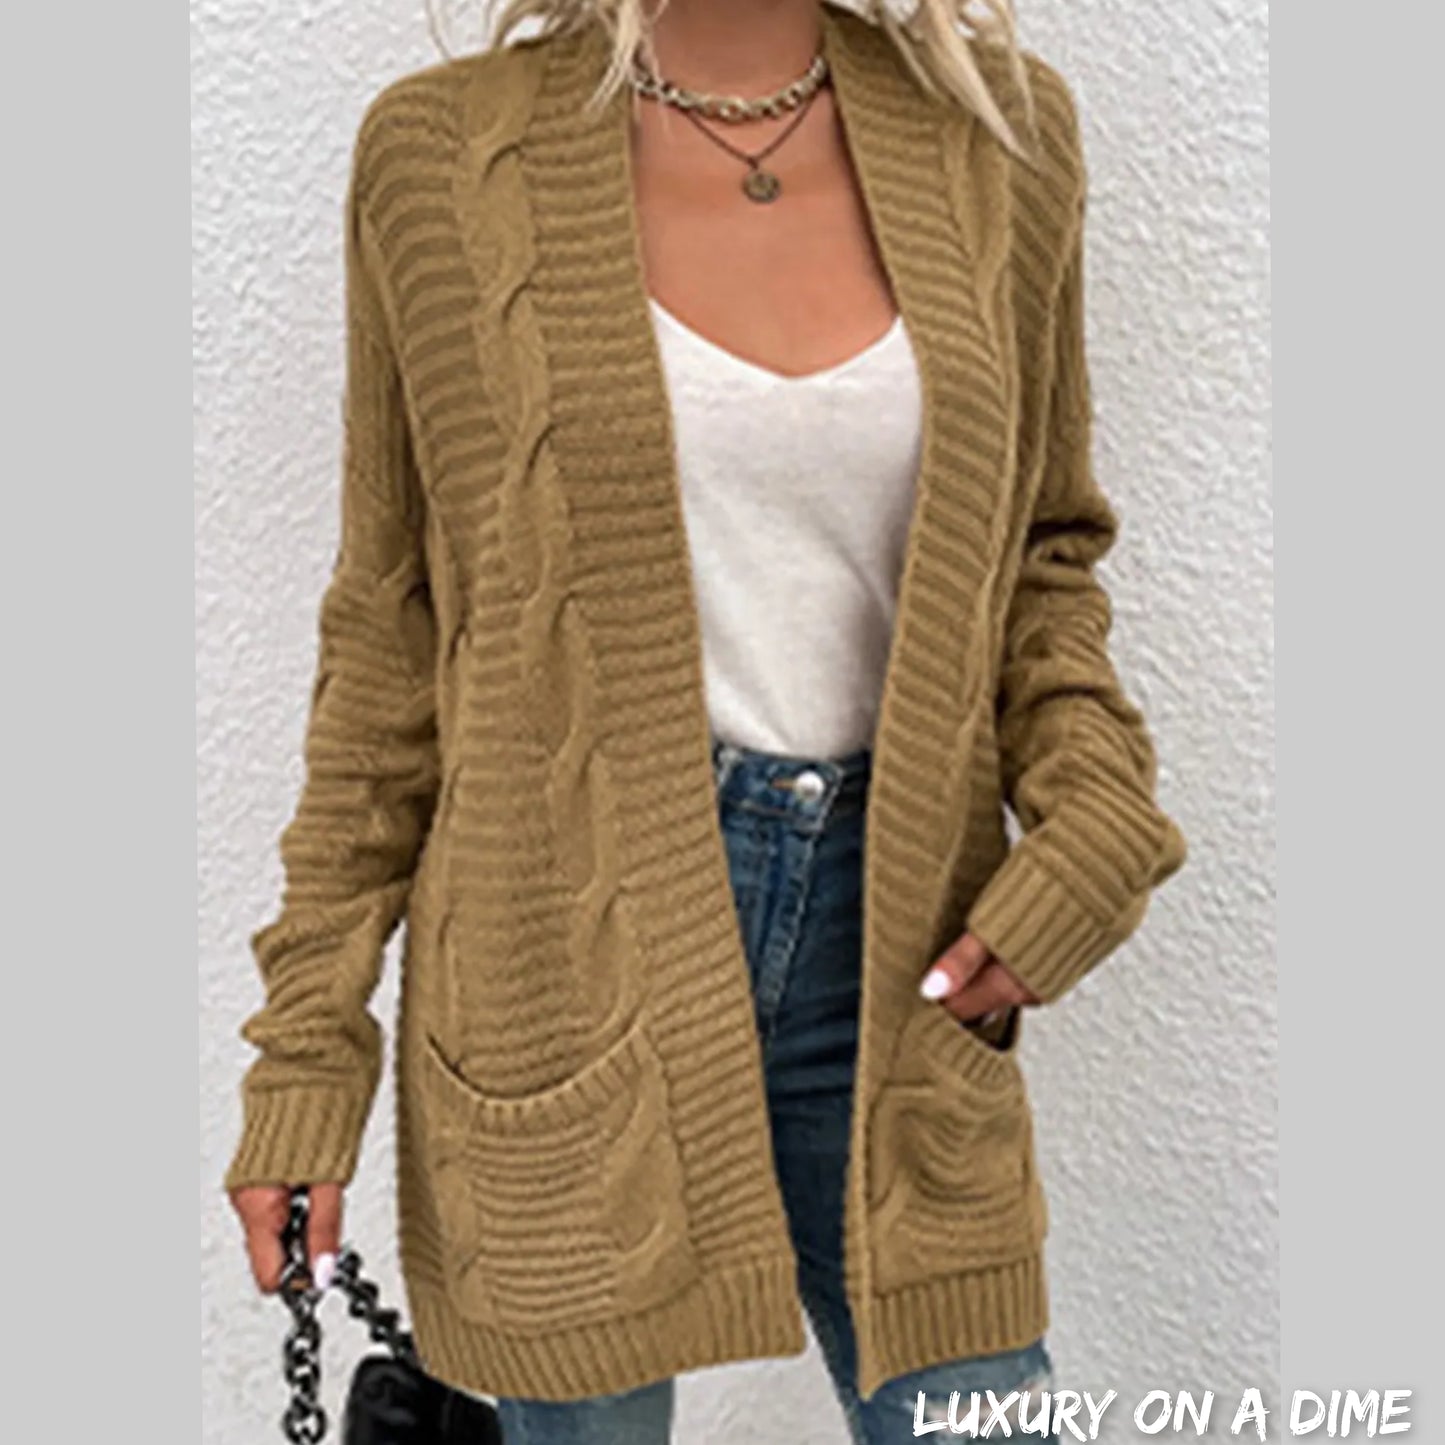 Oversized Cable Knit Classic Open Front Patch Pocket Cardigan Fall Winter